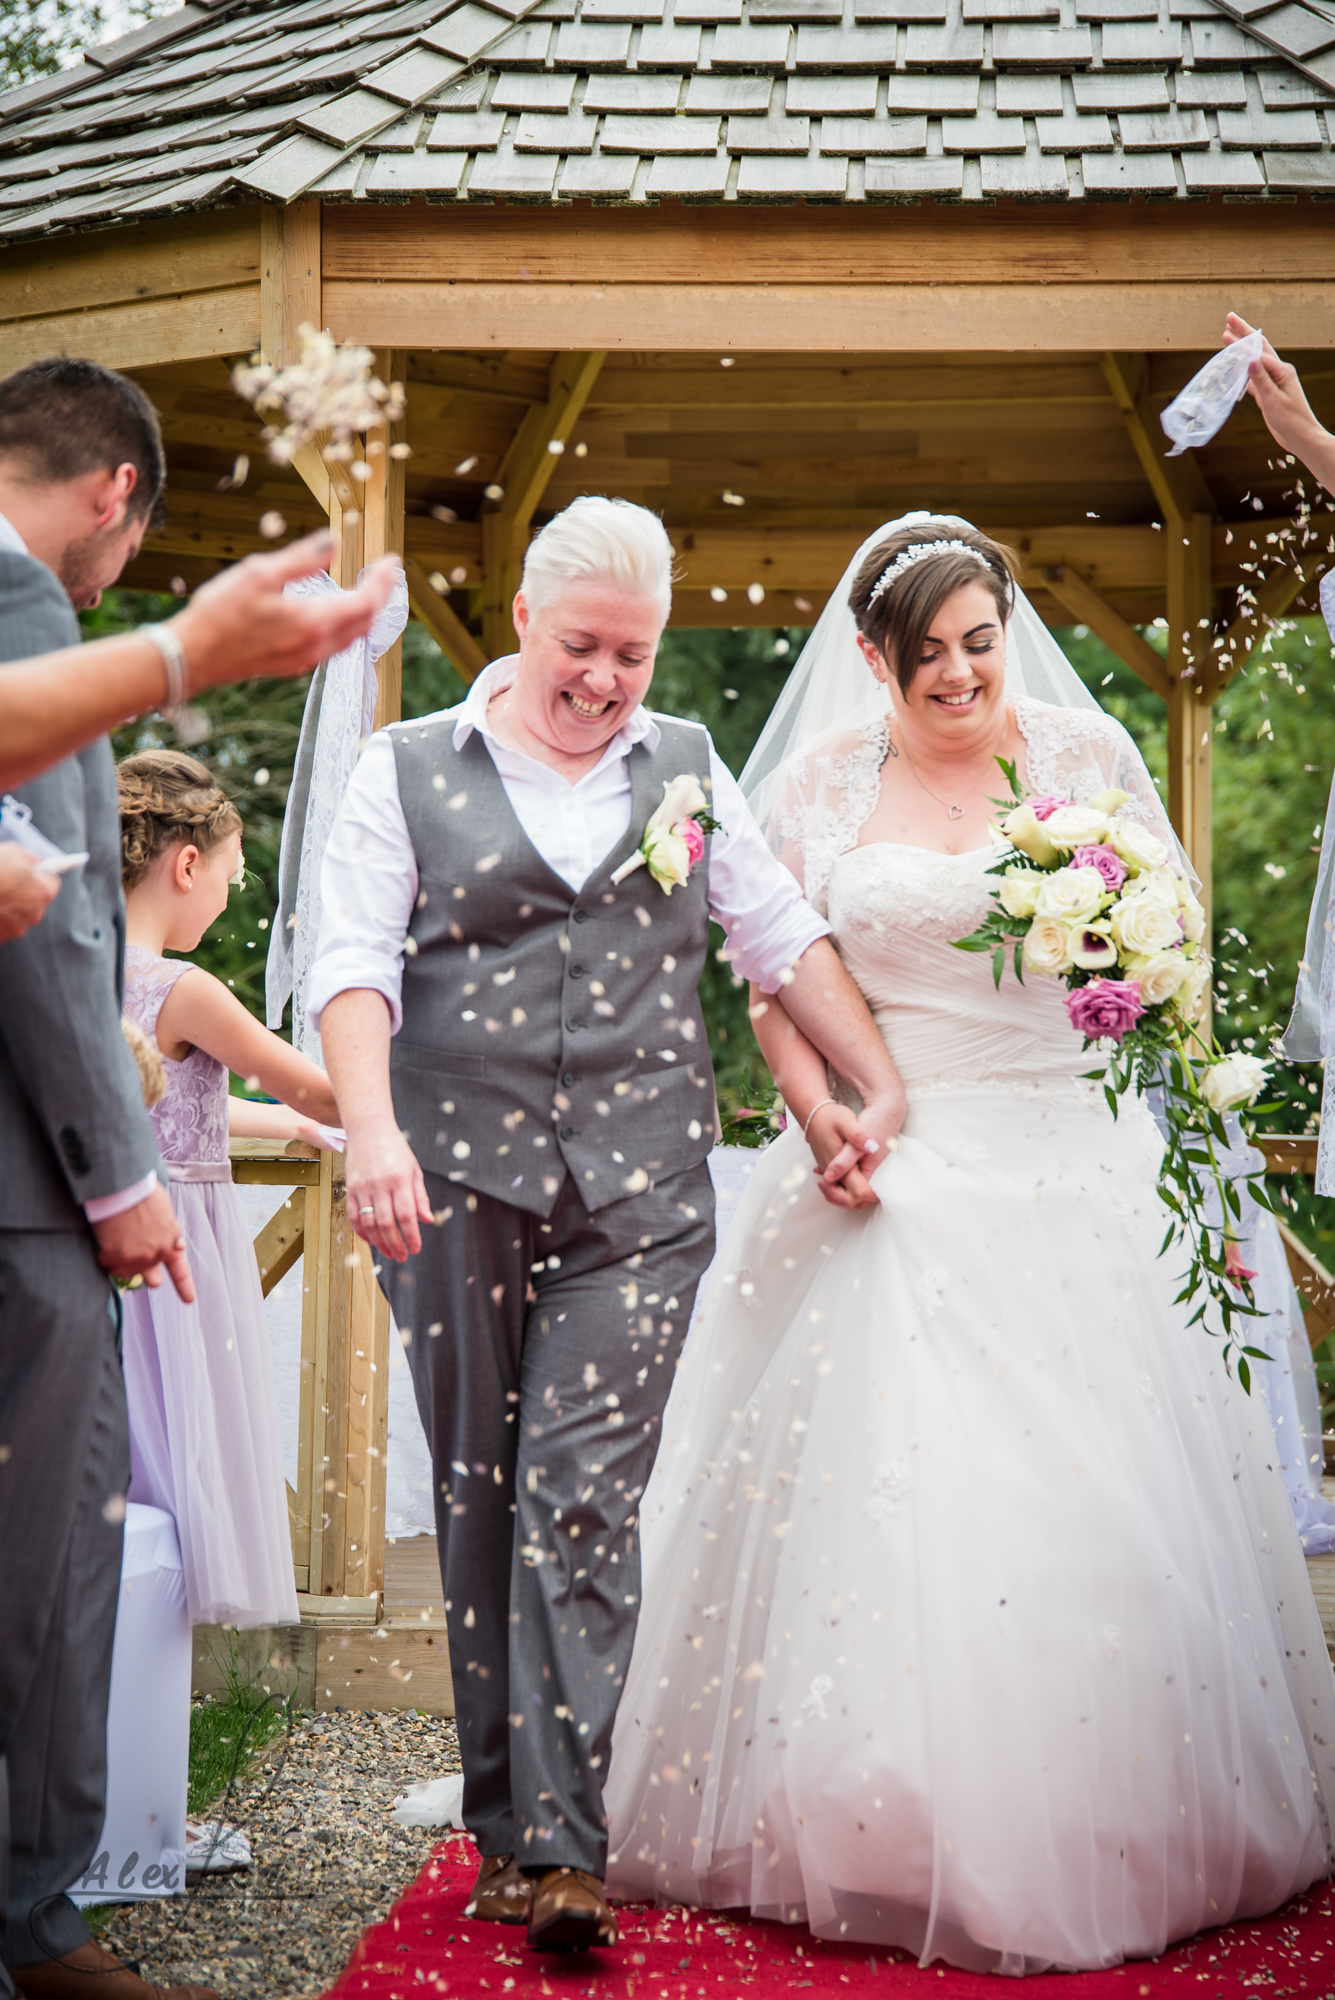 the bride and bride walk down the aisle together getting covered in confetti